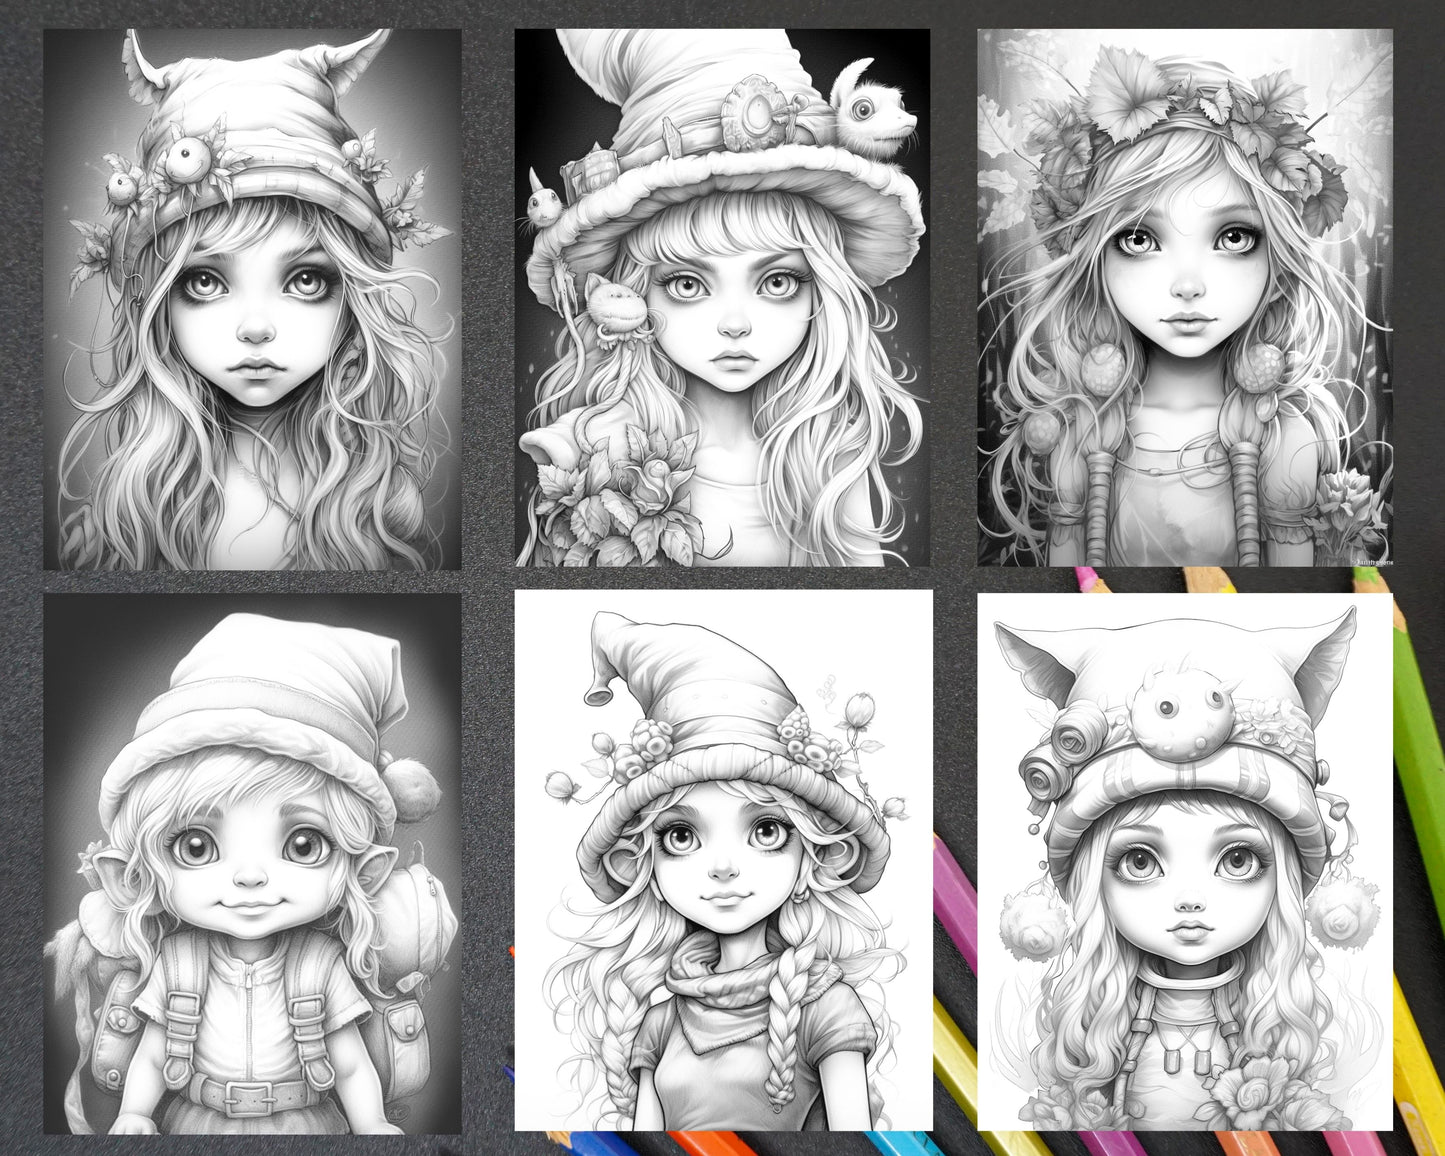 Adorable Gnome Girls Grayscale Coloring Pages, Printable Coloring Sheets, Coloring Book Illustrations, Gnome Art for Adults and Kids